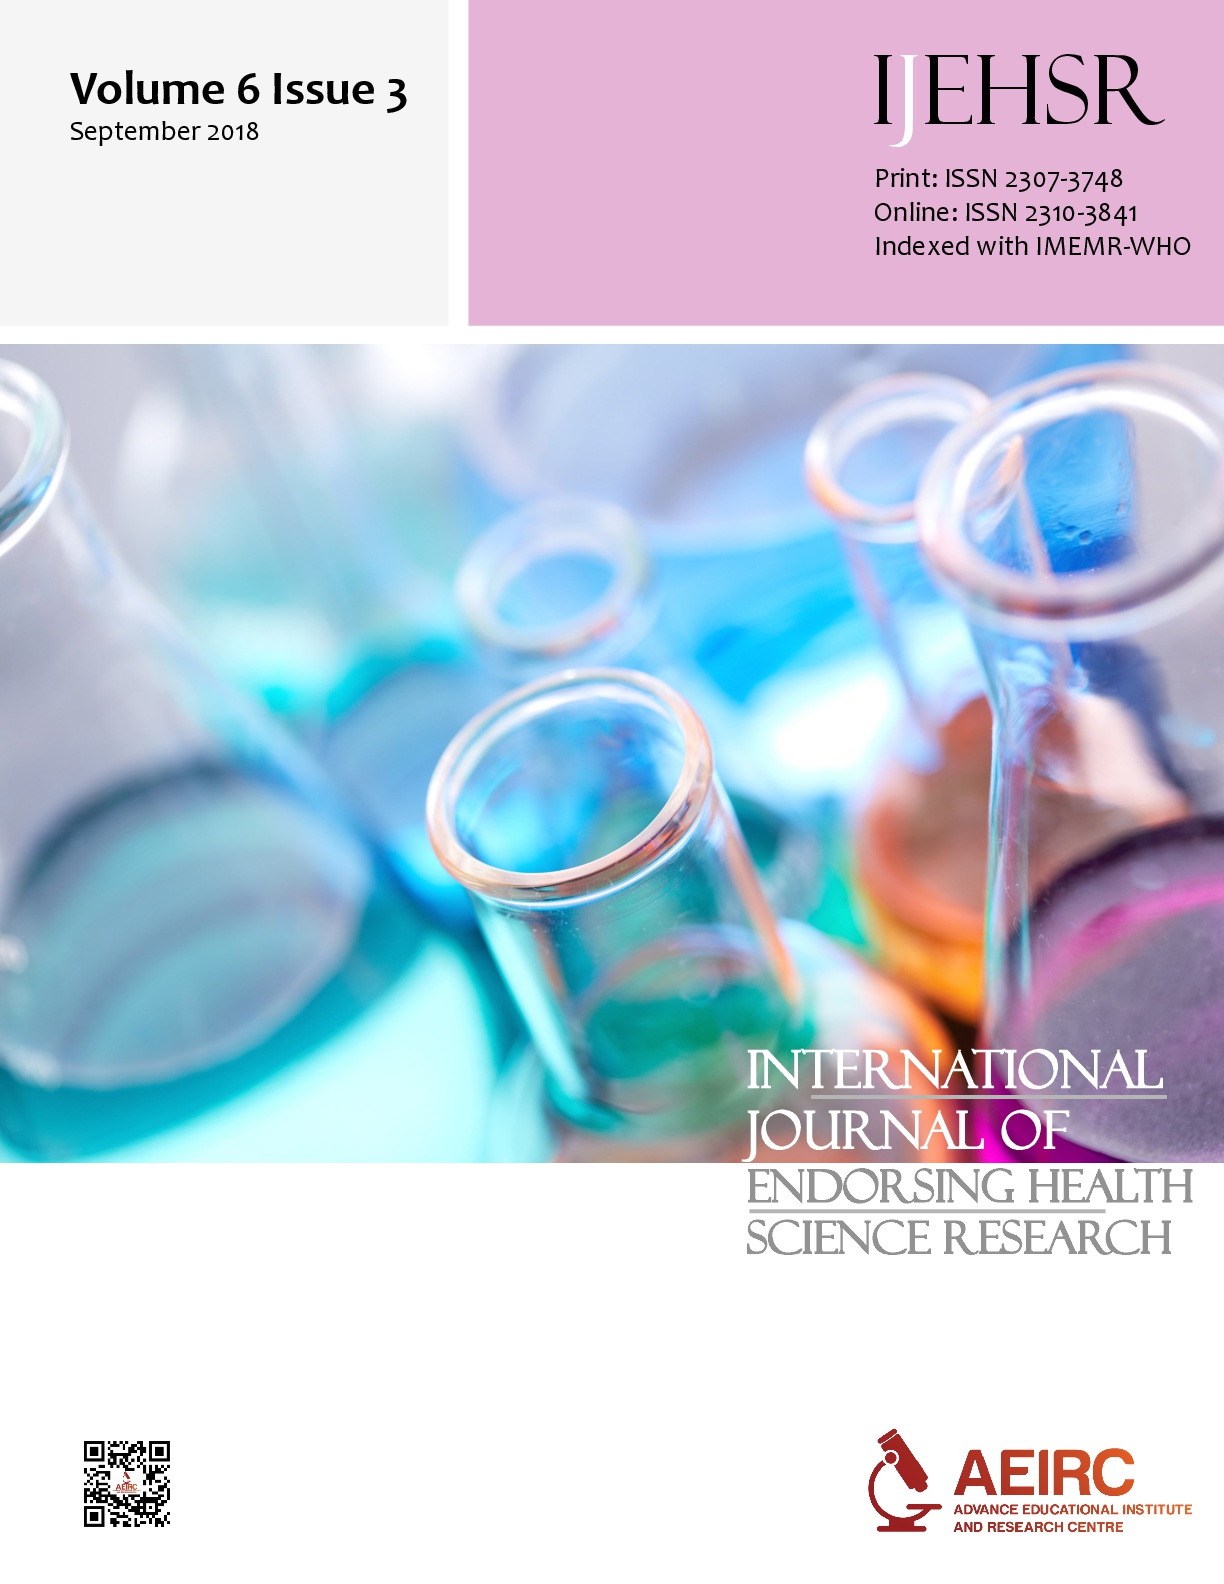 					View Vol. 6 No. 3 (2018): International Journal of Endorsing Health Science Research
				